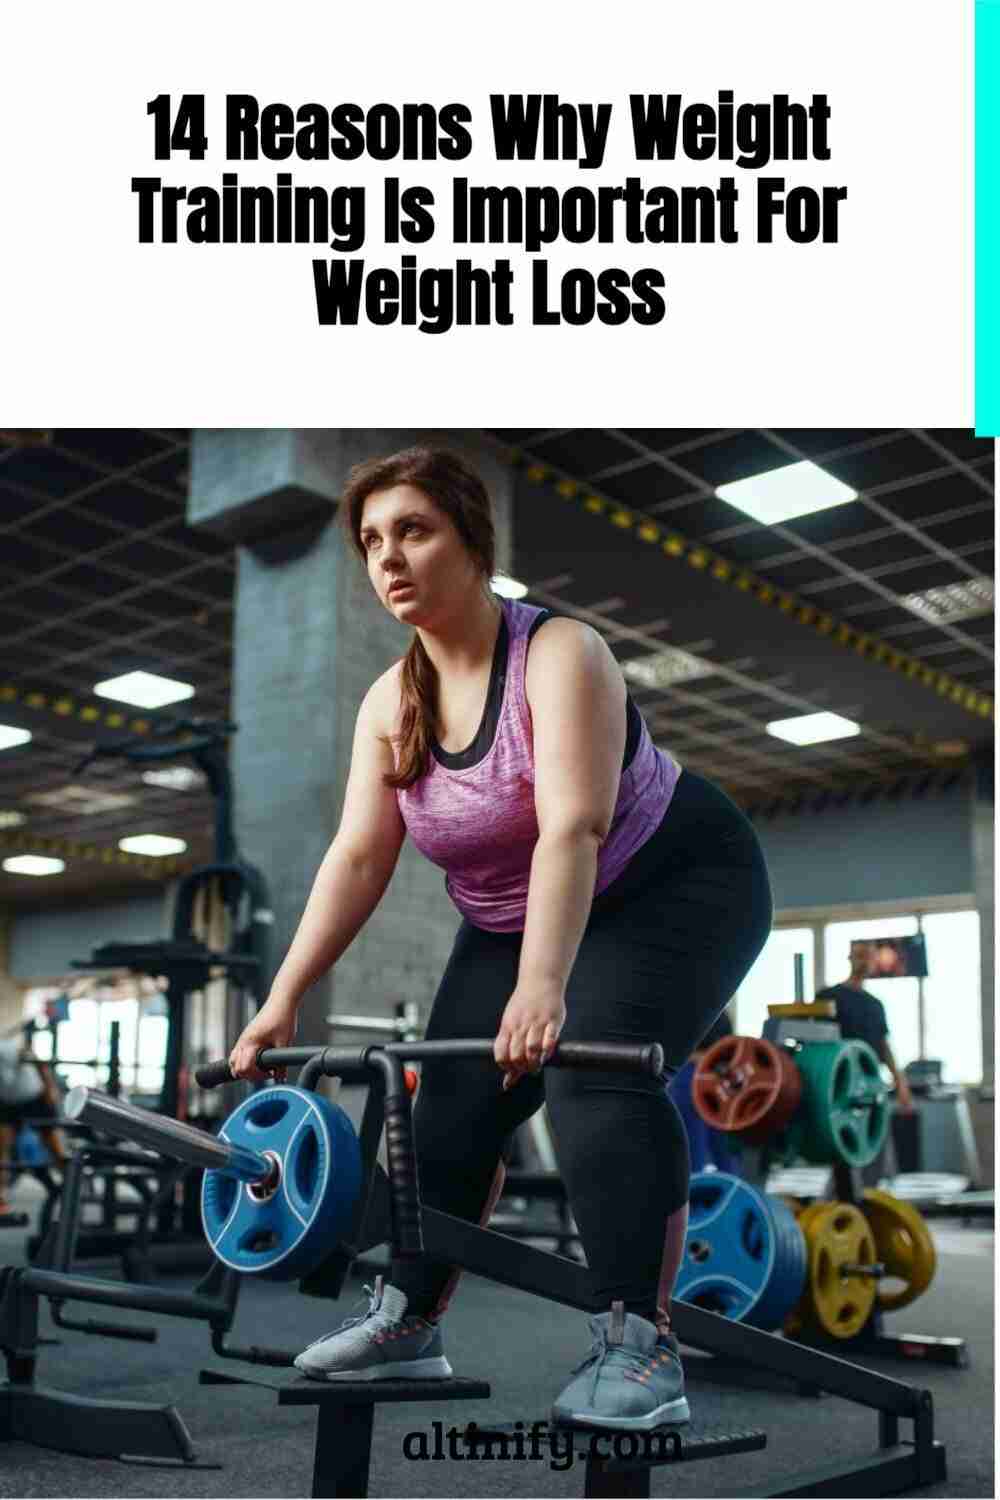 14 Reasons Why Weight Training Is Important For Weight Loss